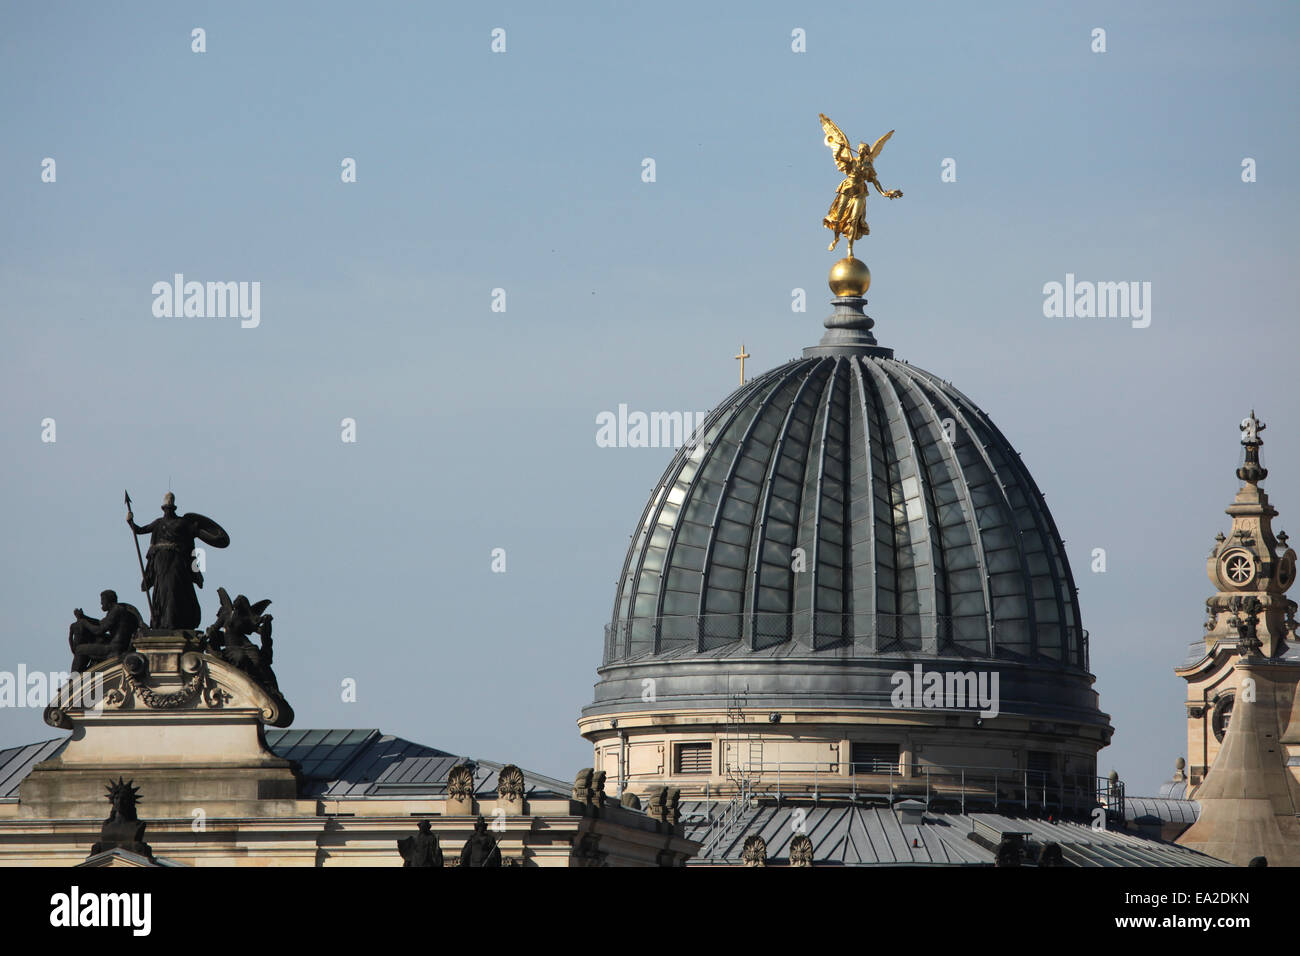 Dome of the Academy of Fine Arts in Dresden, Saxony, Germany. Stock Photo